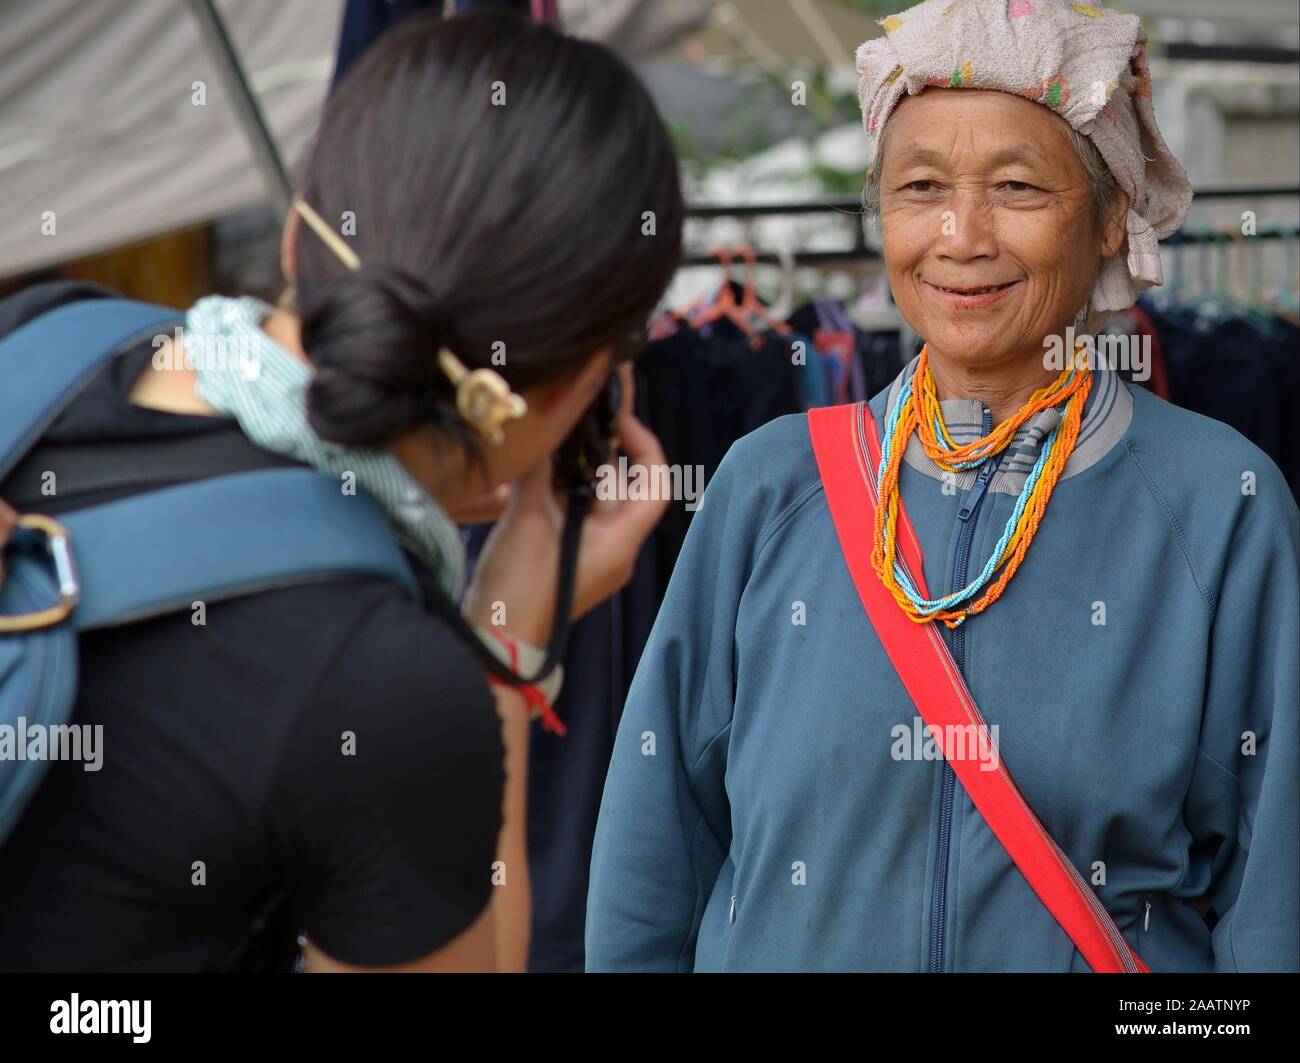 Japanese portrait photographer (tourist) takes a portrait photo of an elderly Thai Karen tribal woman with betel-nut stained lips at weekly market. Stock Photo